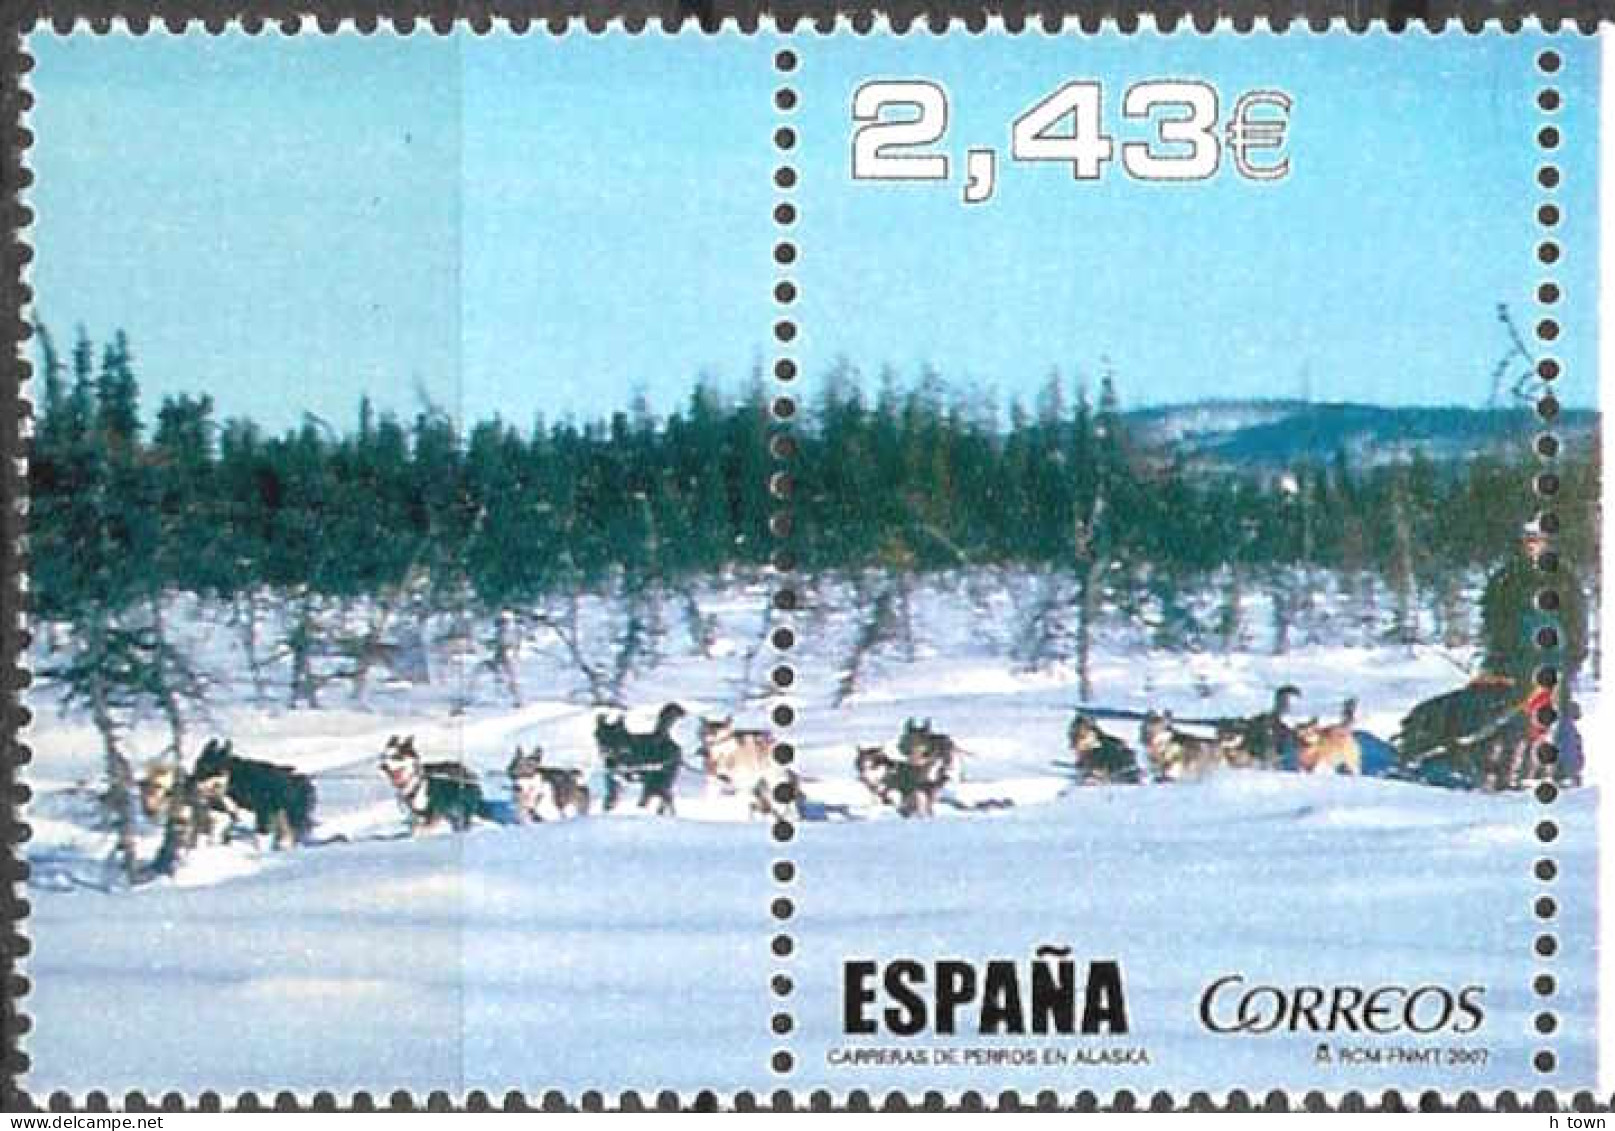 413  Chiens D'attelage: Timbre D'Espagne, 2007 - Sled Dogs In Alaska: Stamp From Spain. Chien De Traîneau Sledge Dog - Chiens